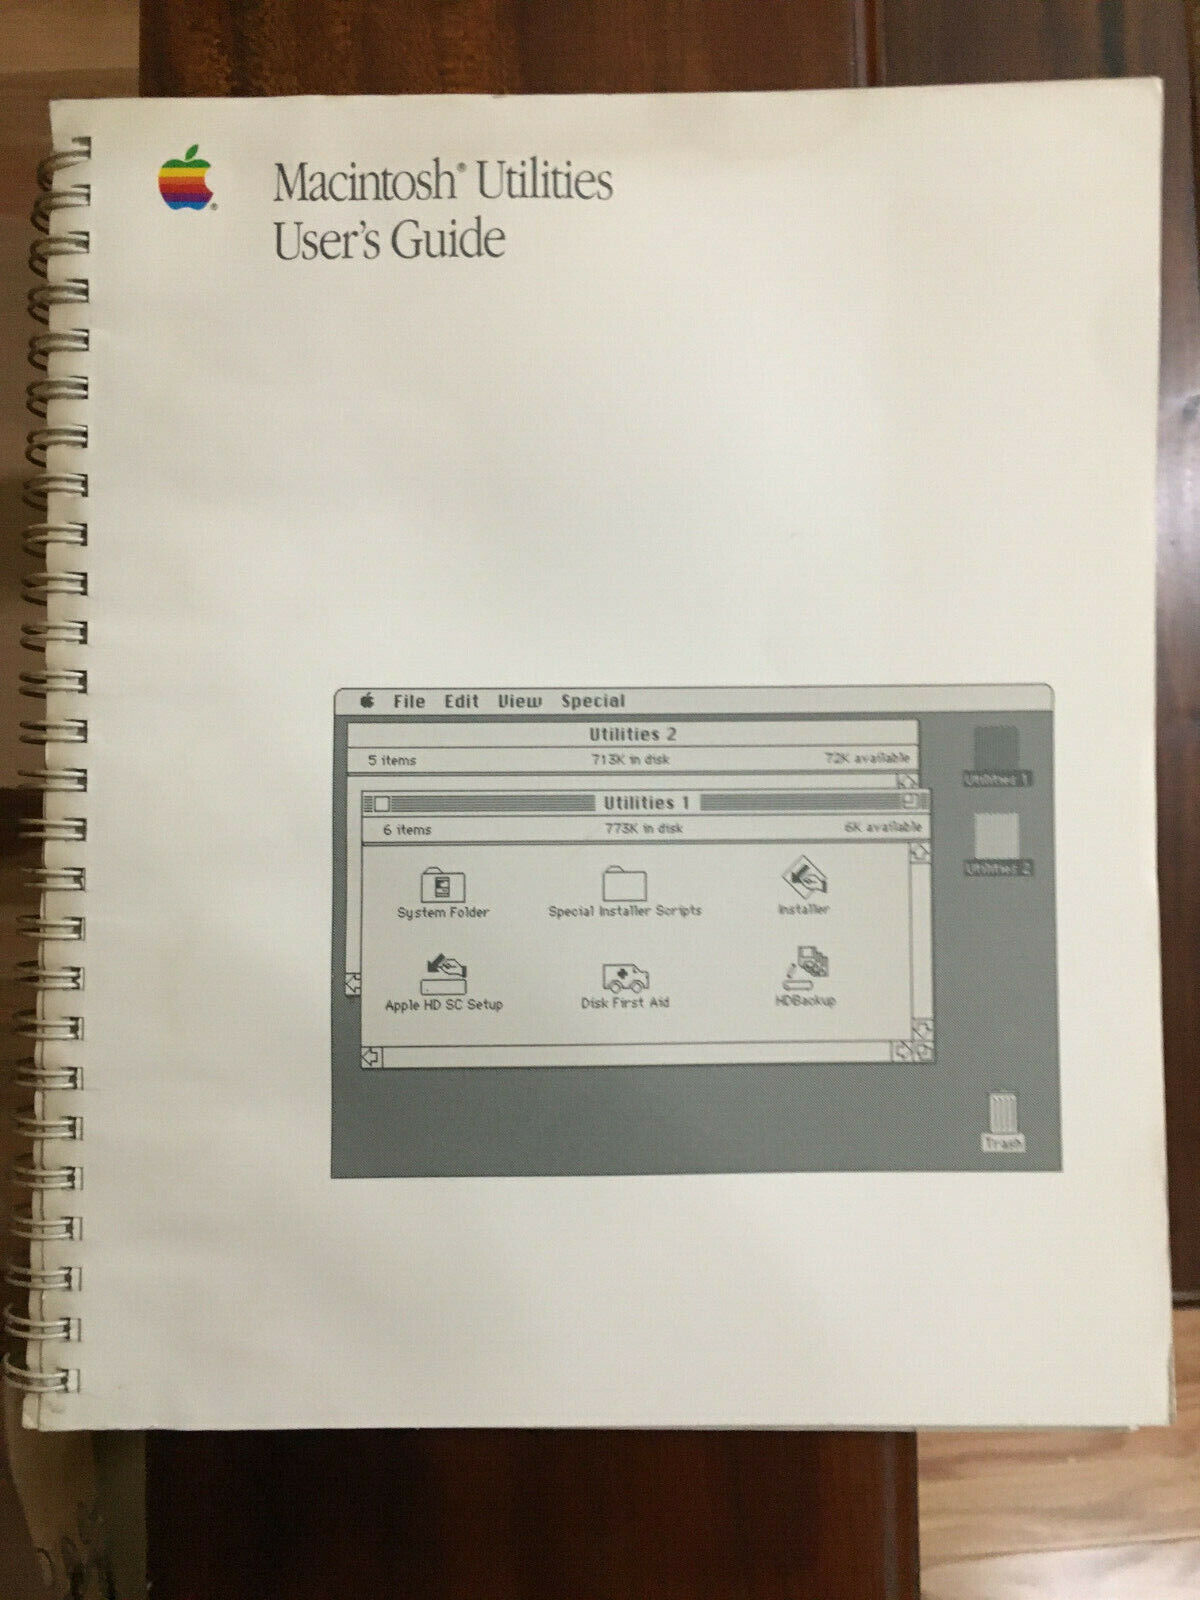 Macintosh Utilities User's Guide  170 page book  © 1988  Antique